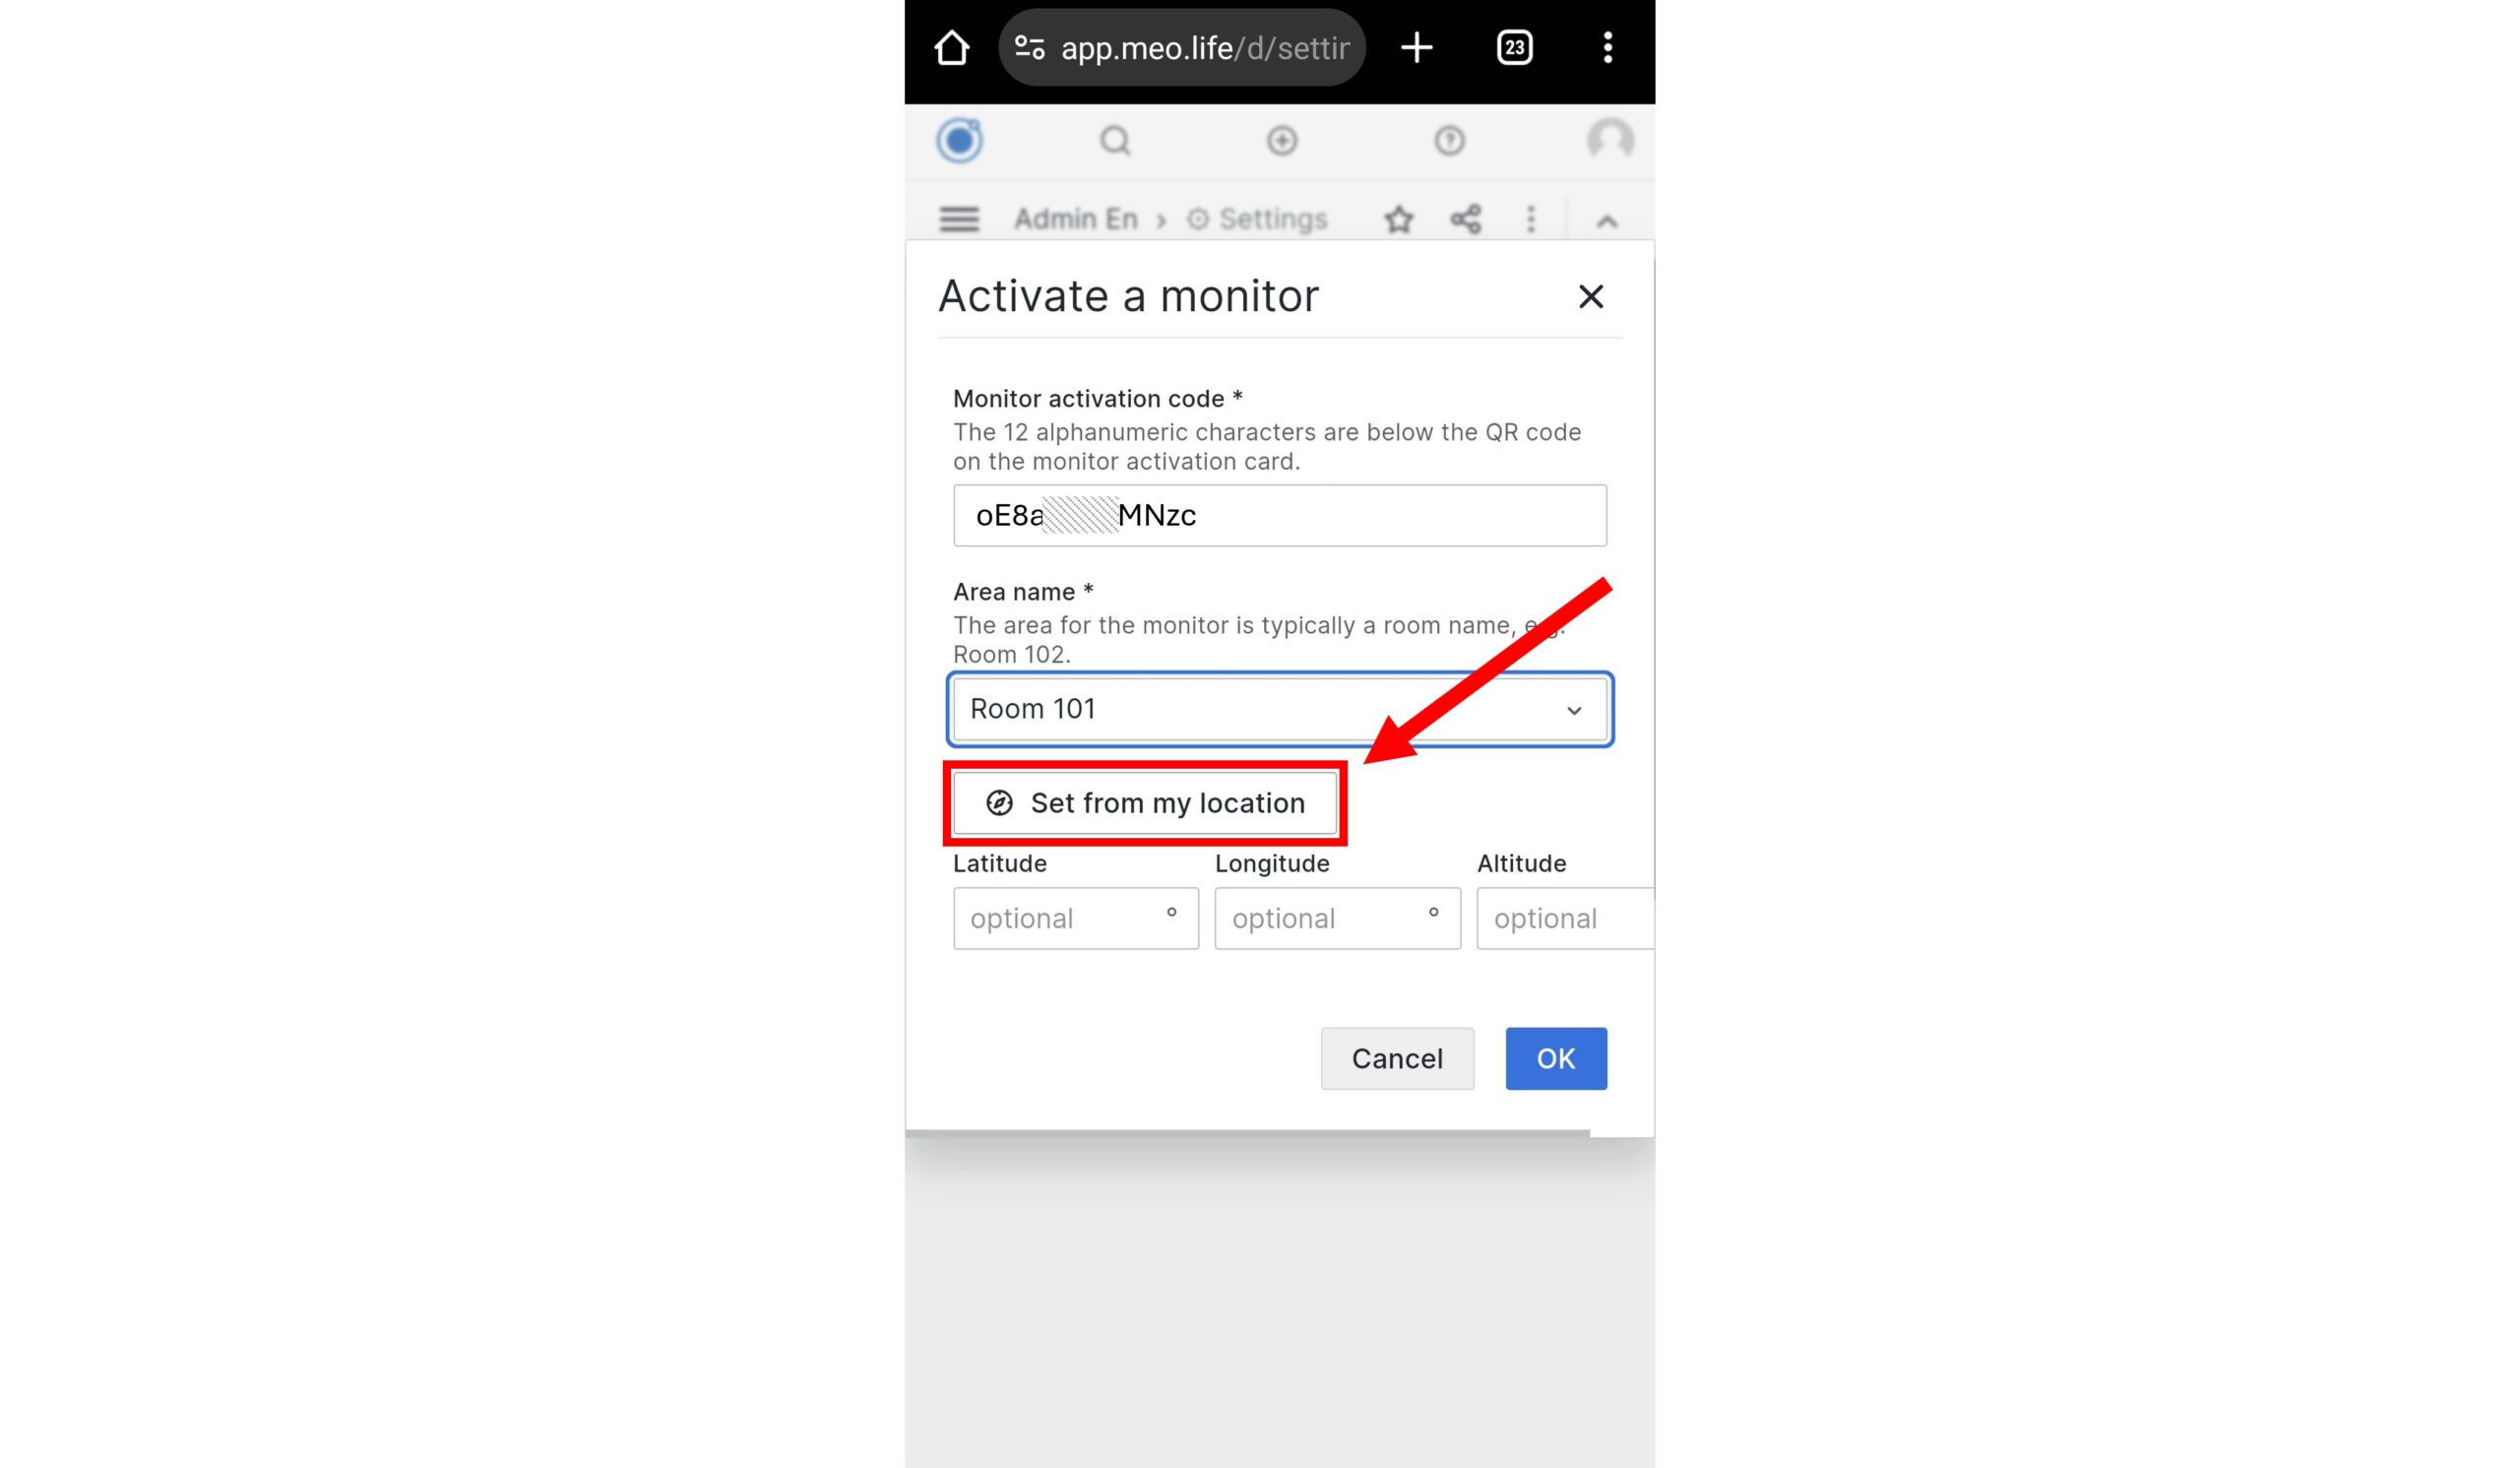 10. Optional: Click on “Set from my location” if you want to set your current smartphone location for this monitor